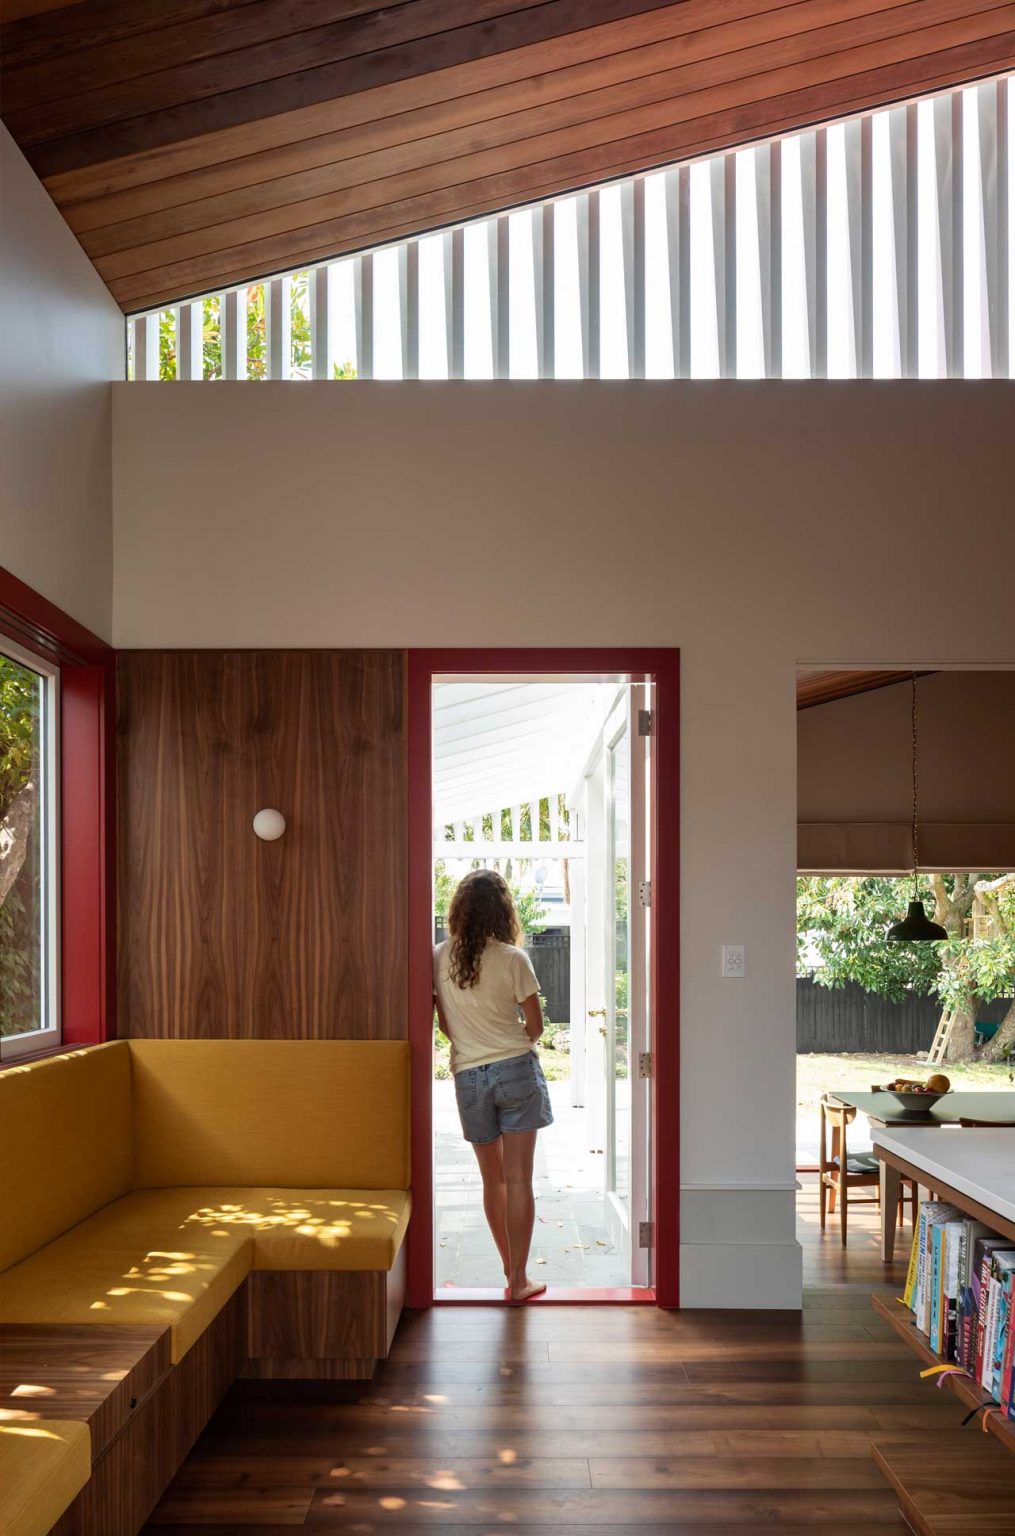 The doors and windows show off red frames that burst the spaces with color and look extra bold